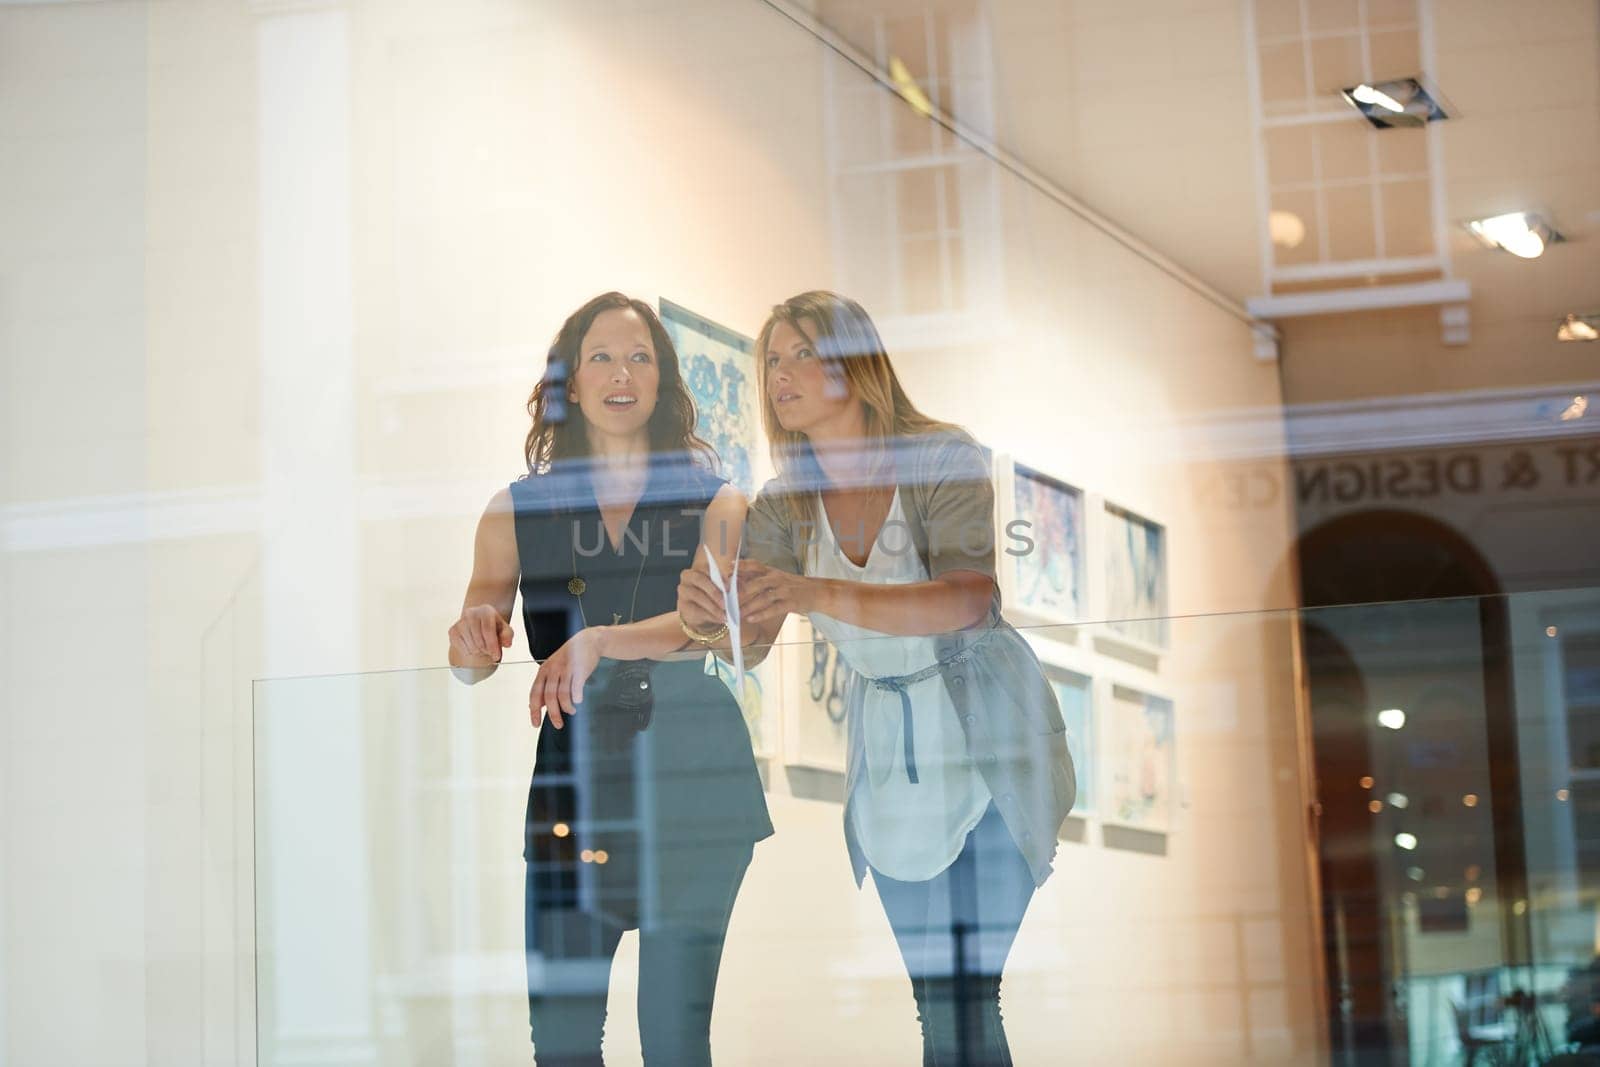 Women, friends together and exhibition at gallery, conversation and culture appreciation. Woman, art critic partnership and looking in museum with talk, lifestyle and ideas by window with reflection.